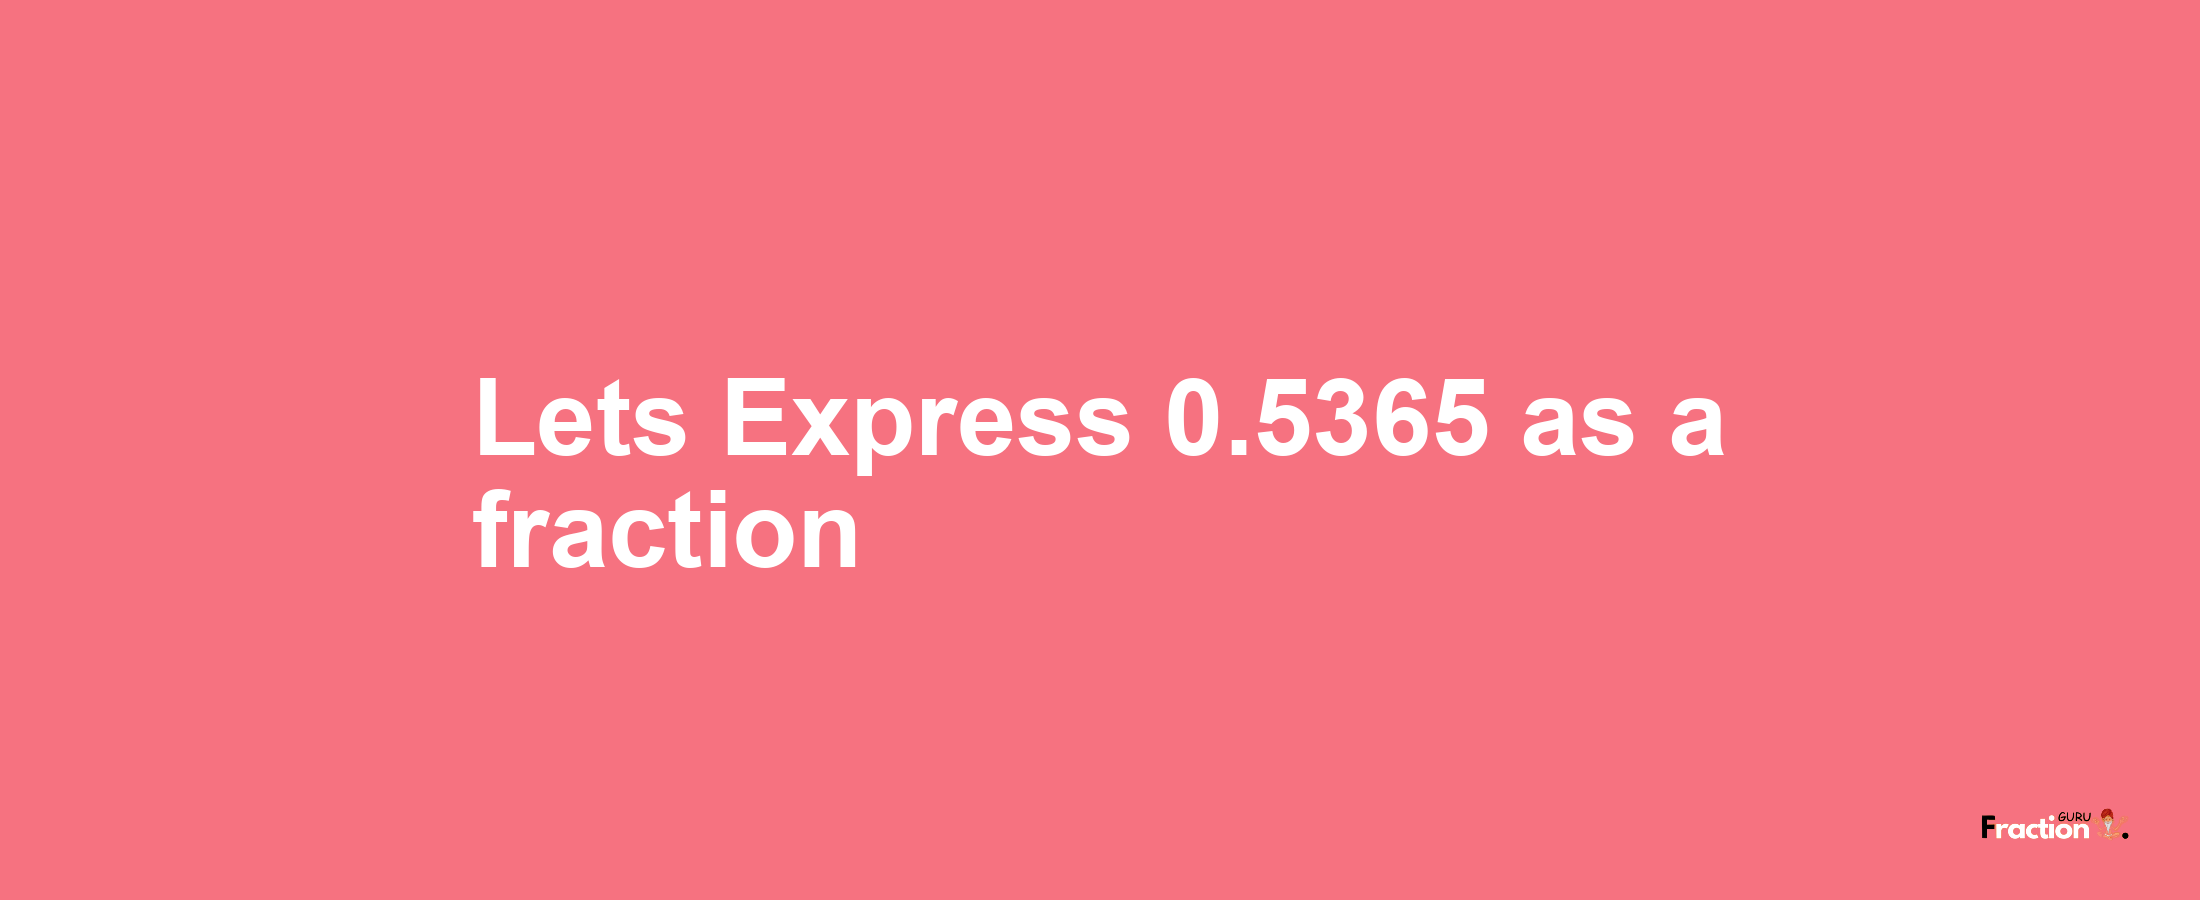 Lets Express 0.5365 as afraction